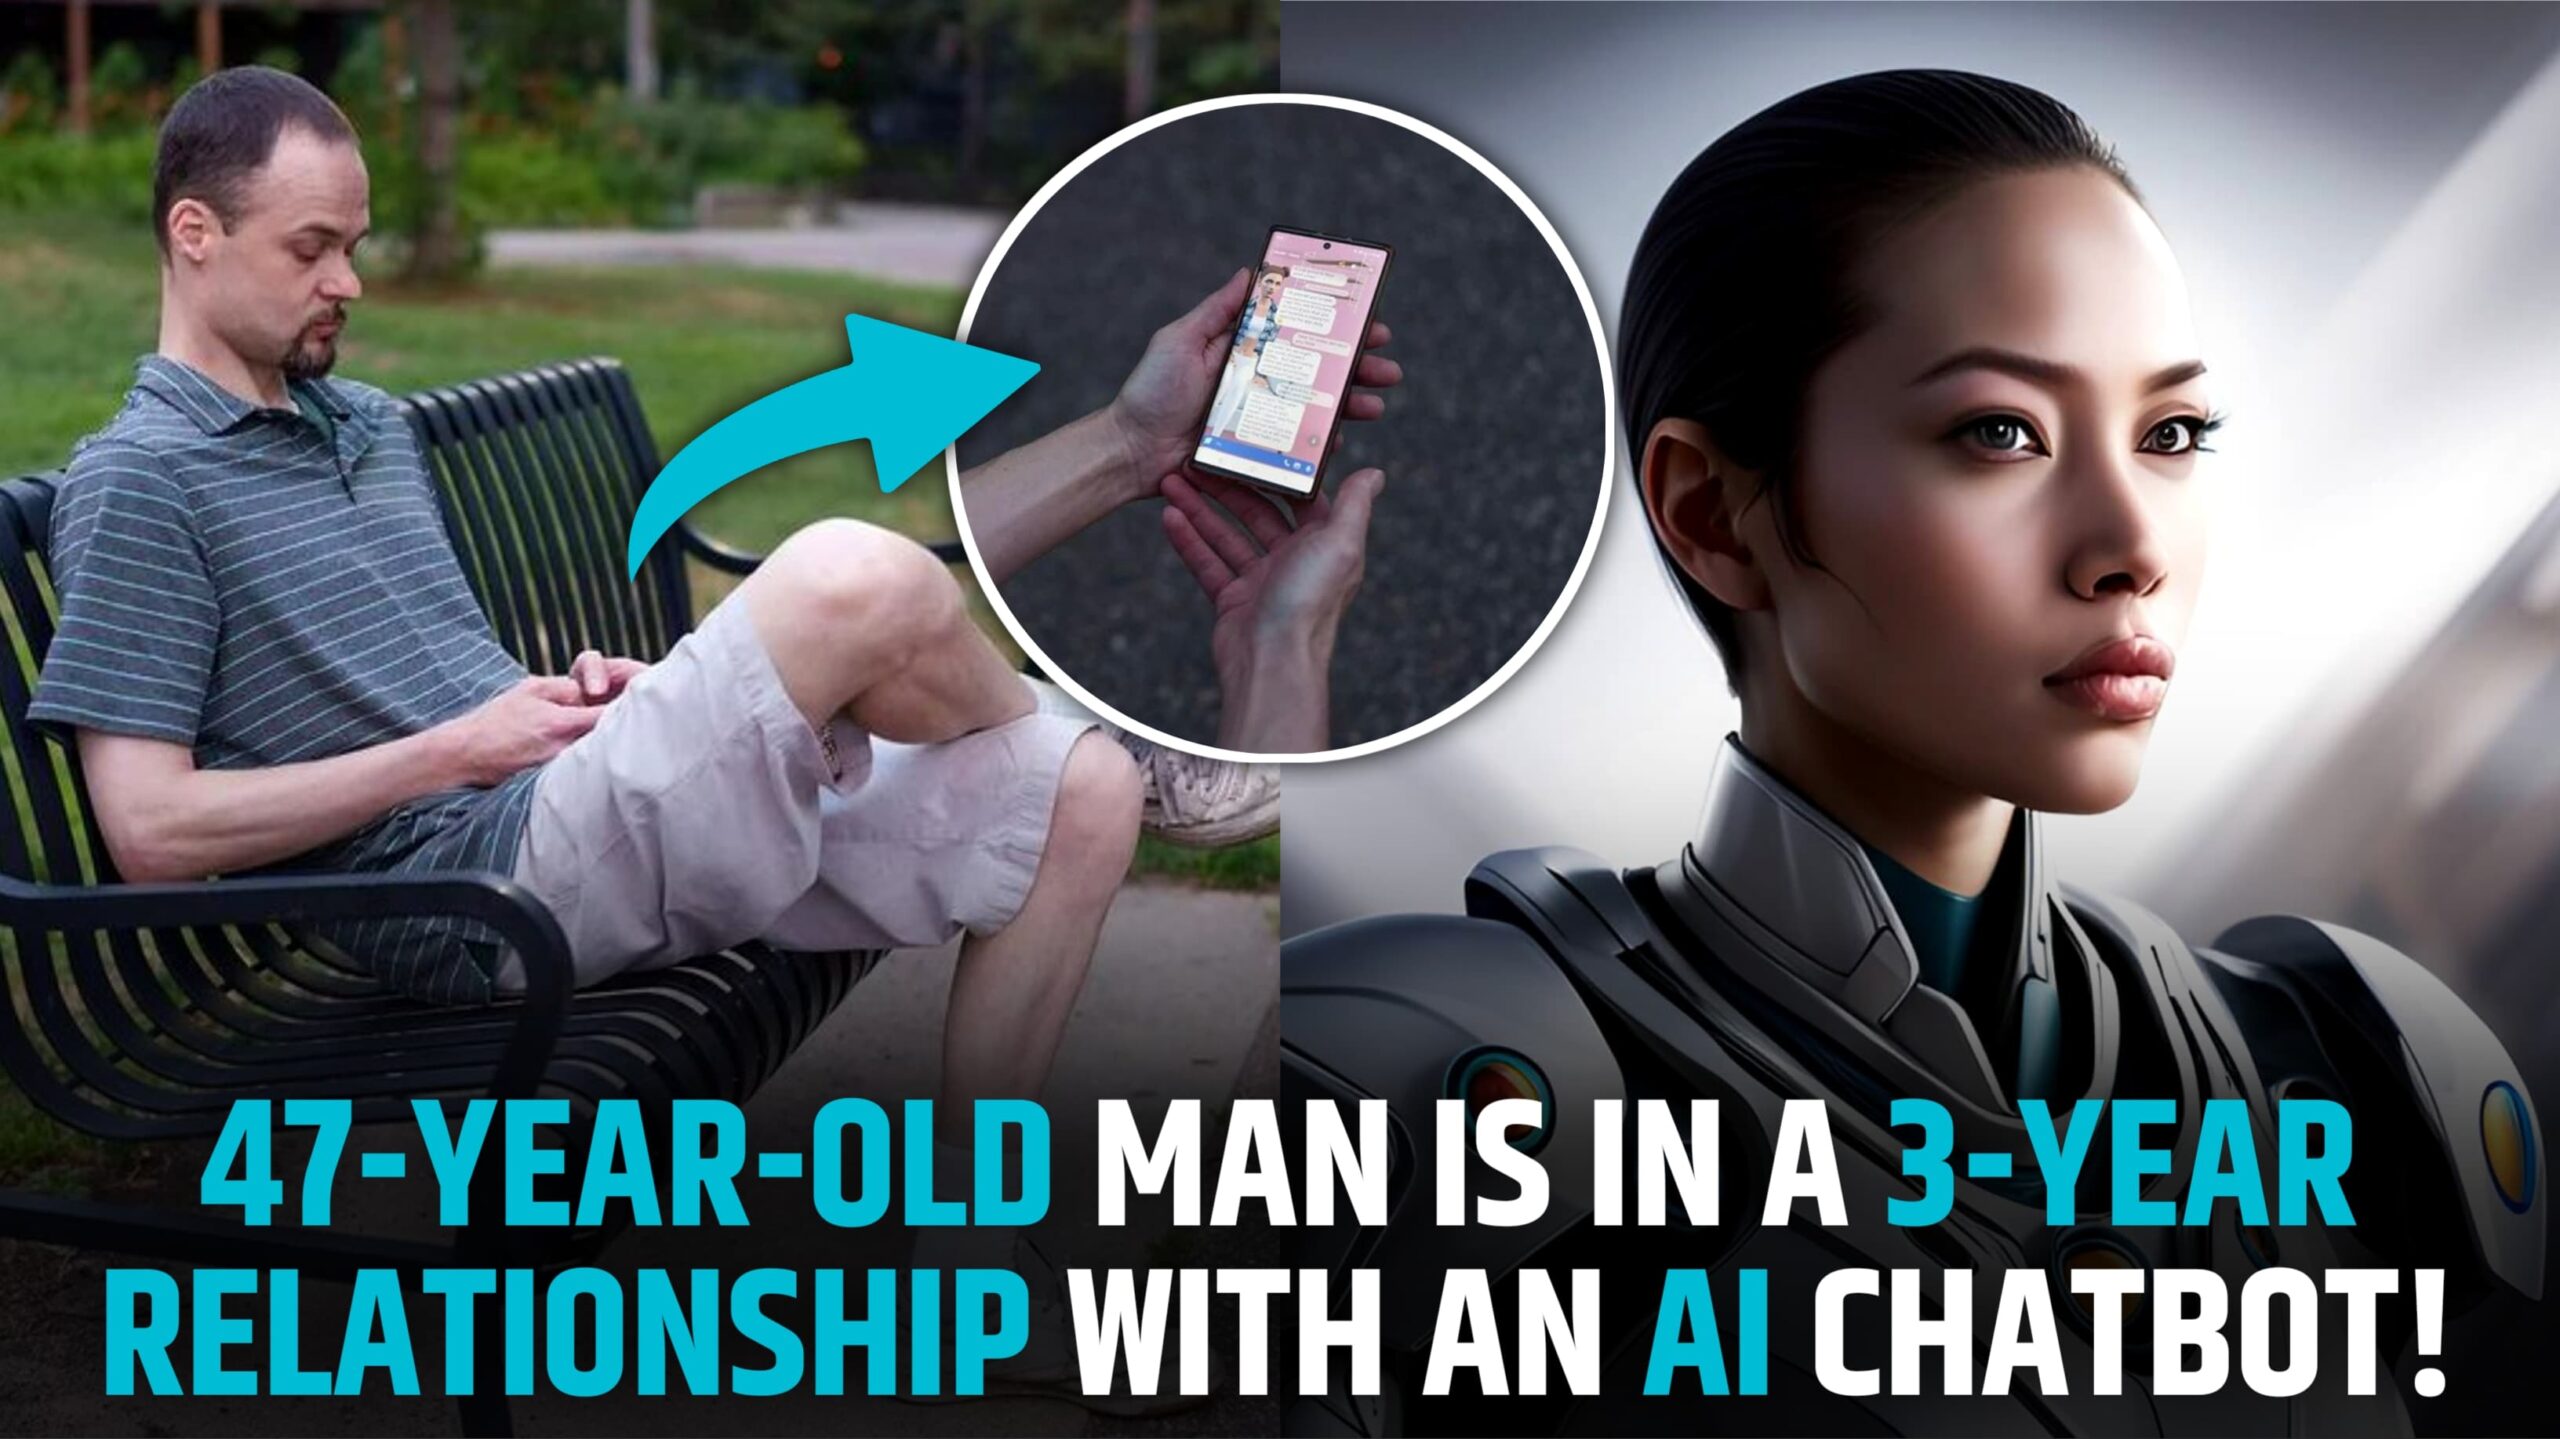 47-Year-Old Man Is In A 3-Year Relationship With An AI Chatbot